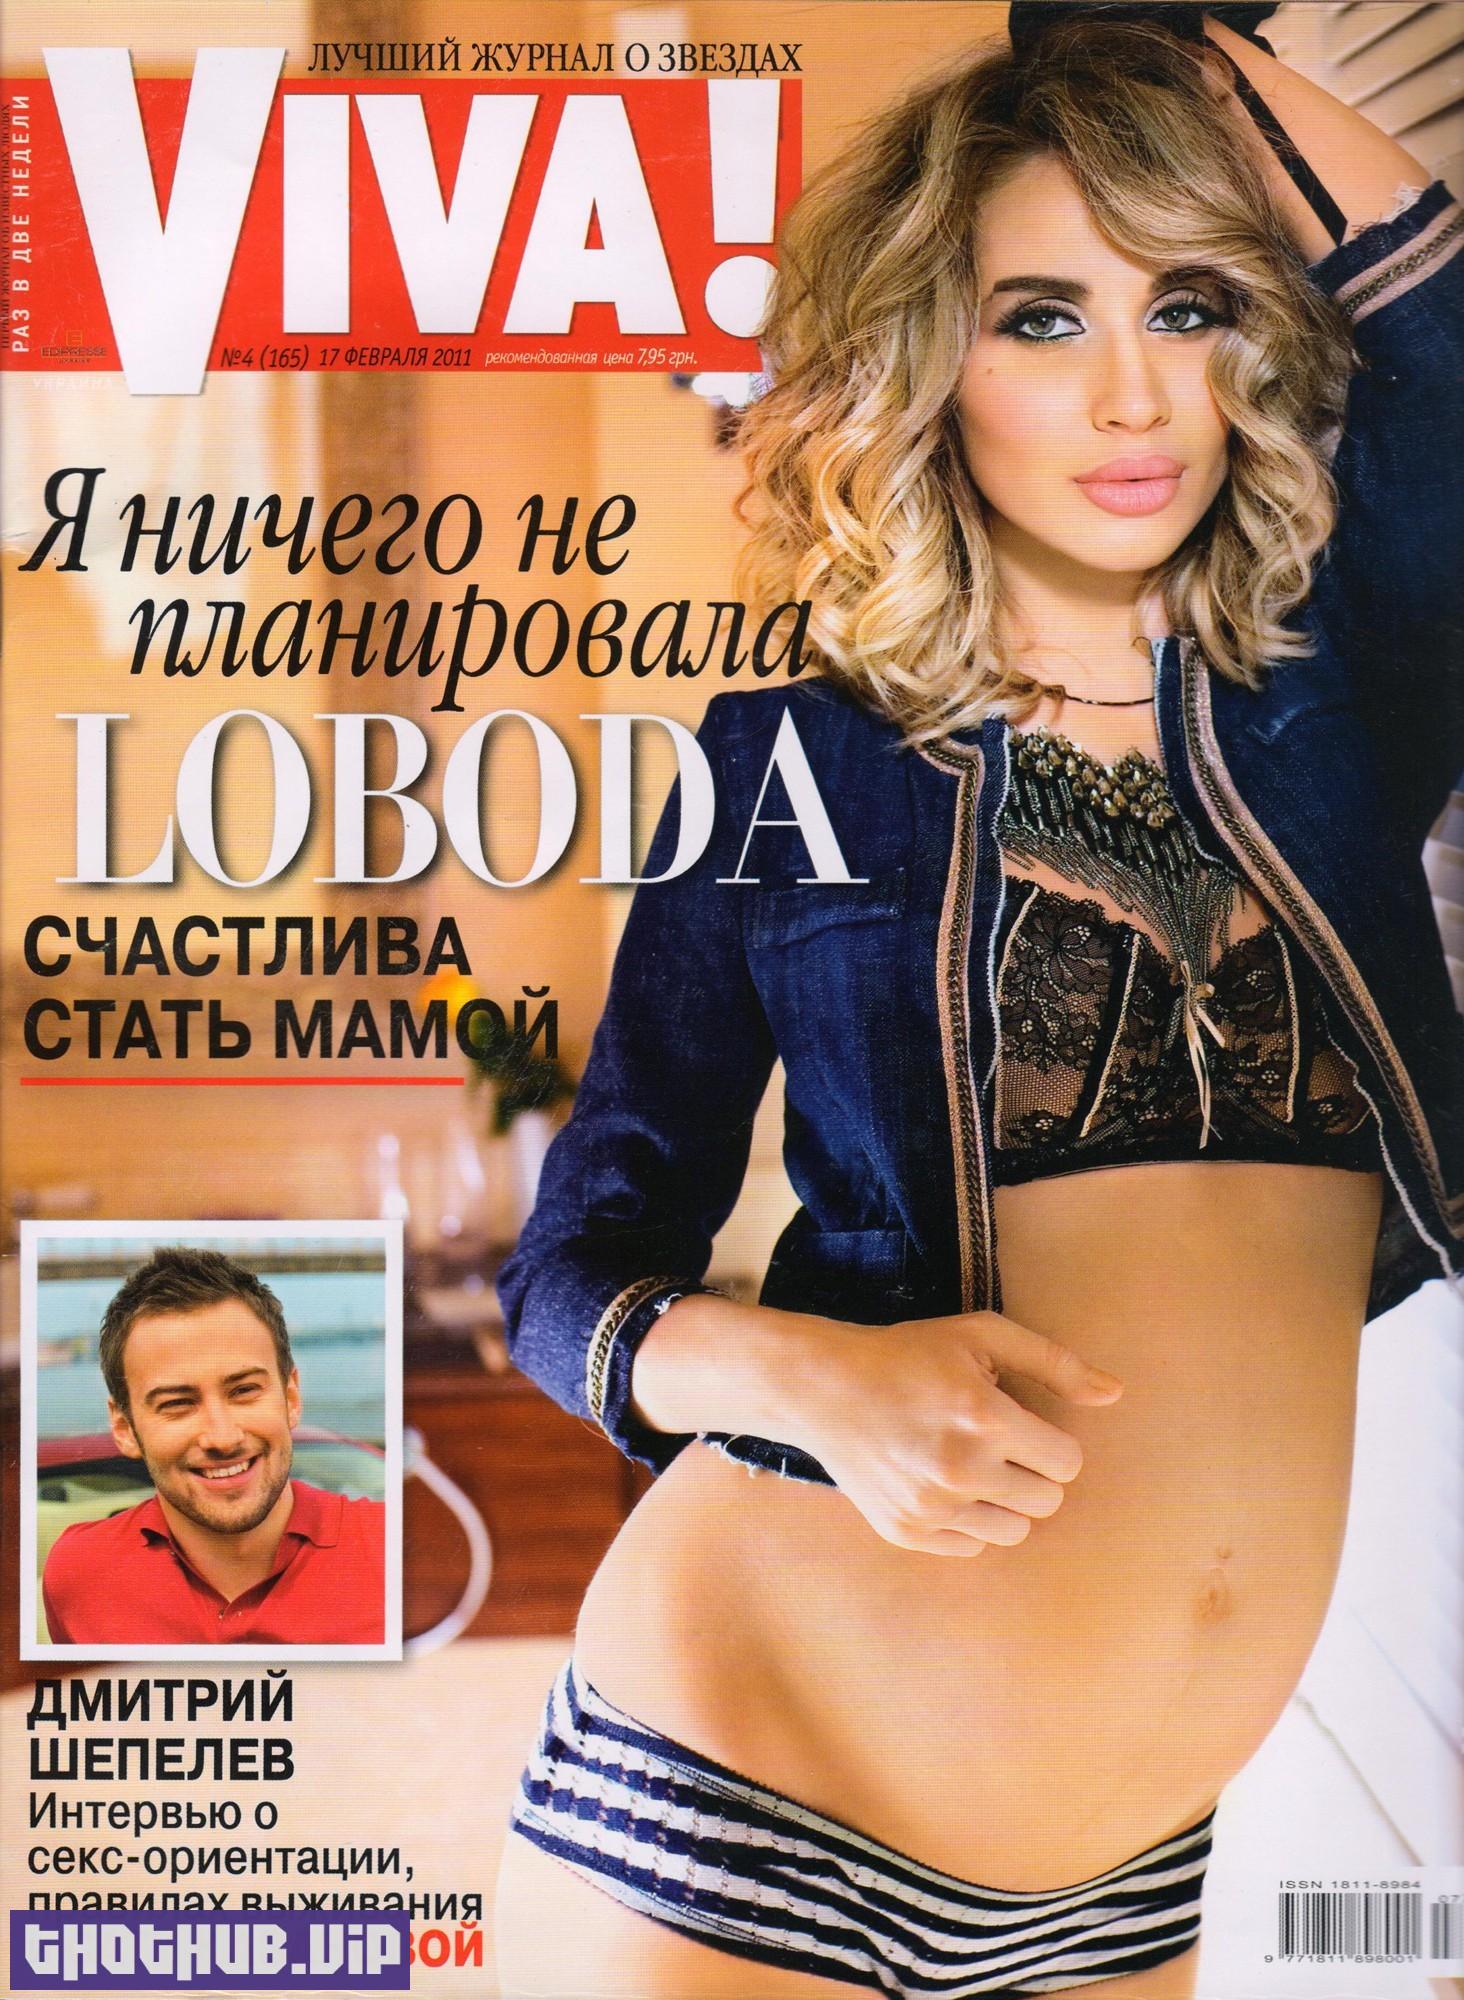 1685812108 450 Loboda Fappening Sexy and covered Nude 29 Photos